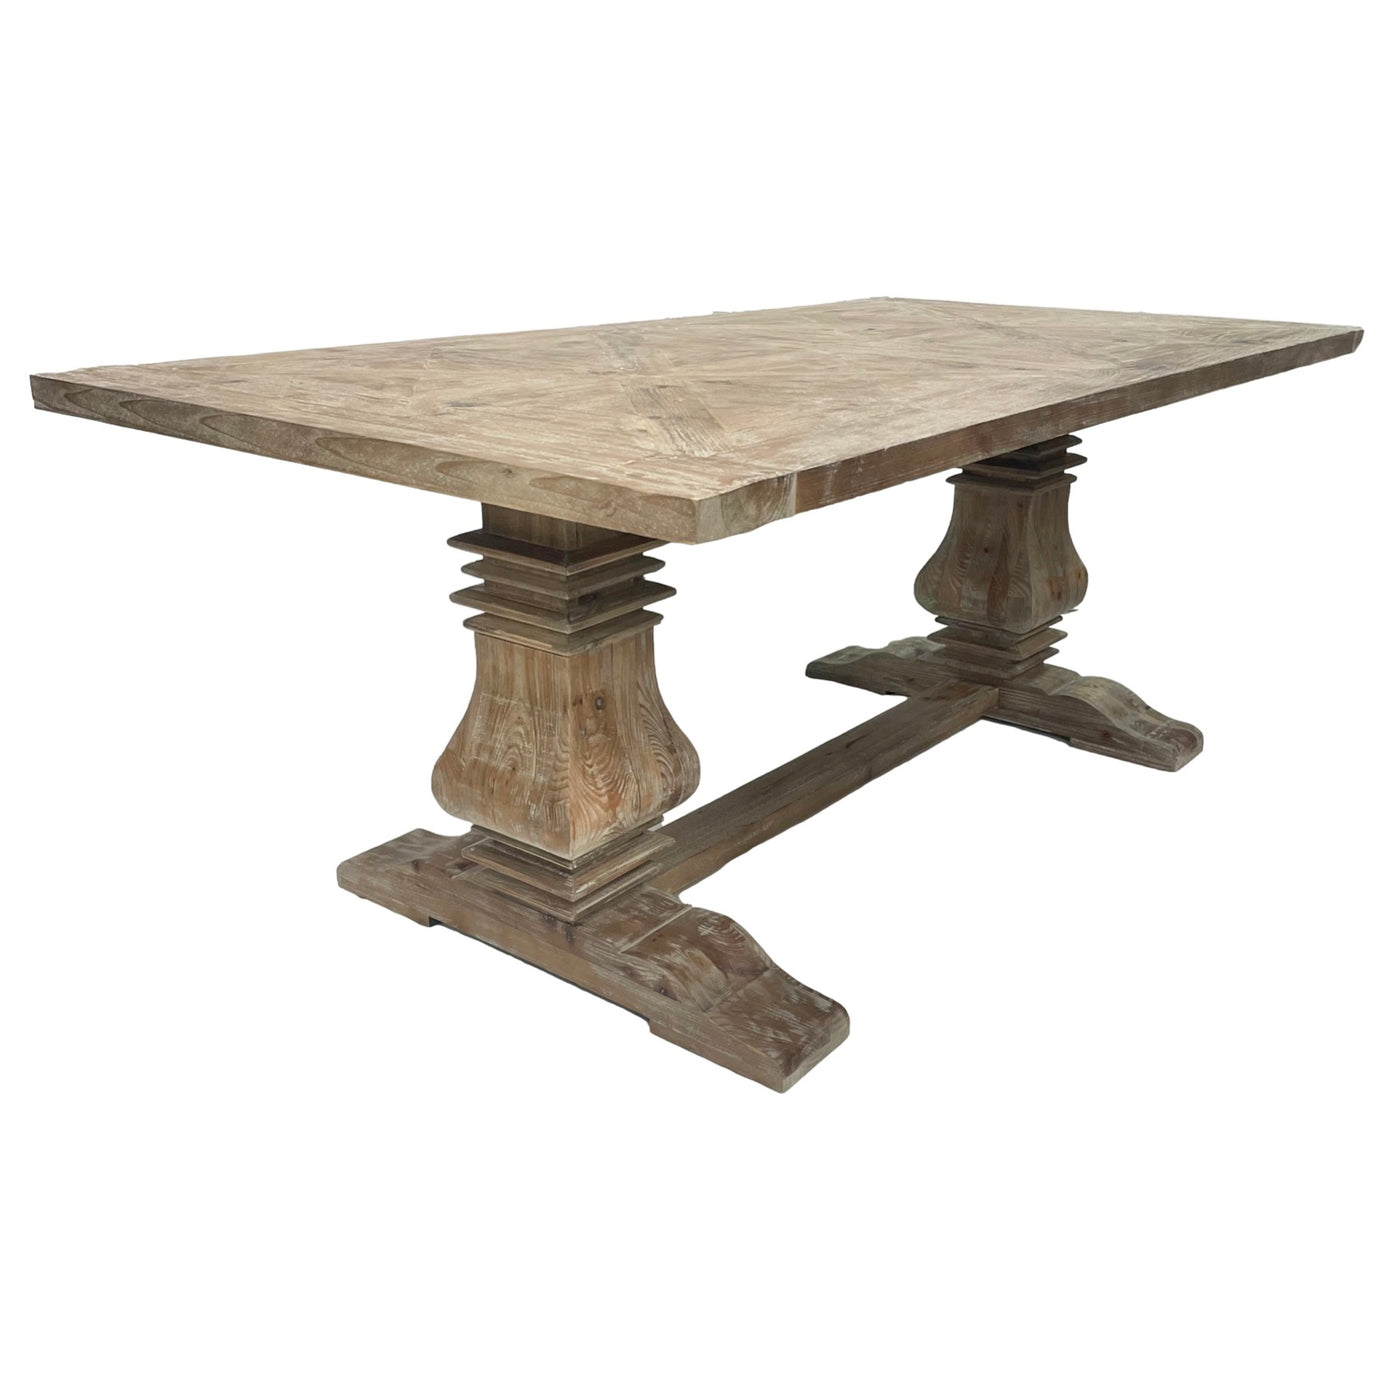 Tides Collection Bowen Parquet Wood Dining Table